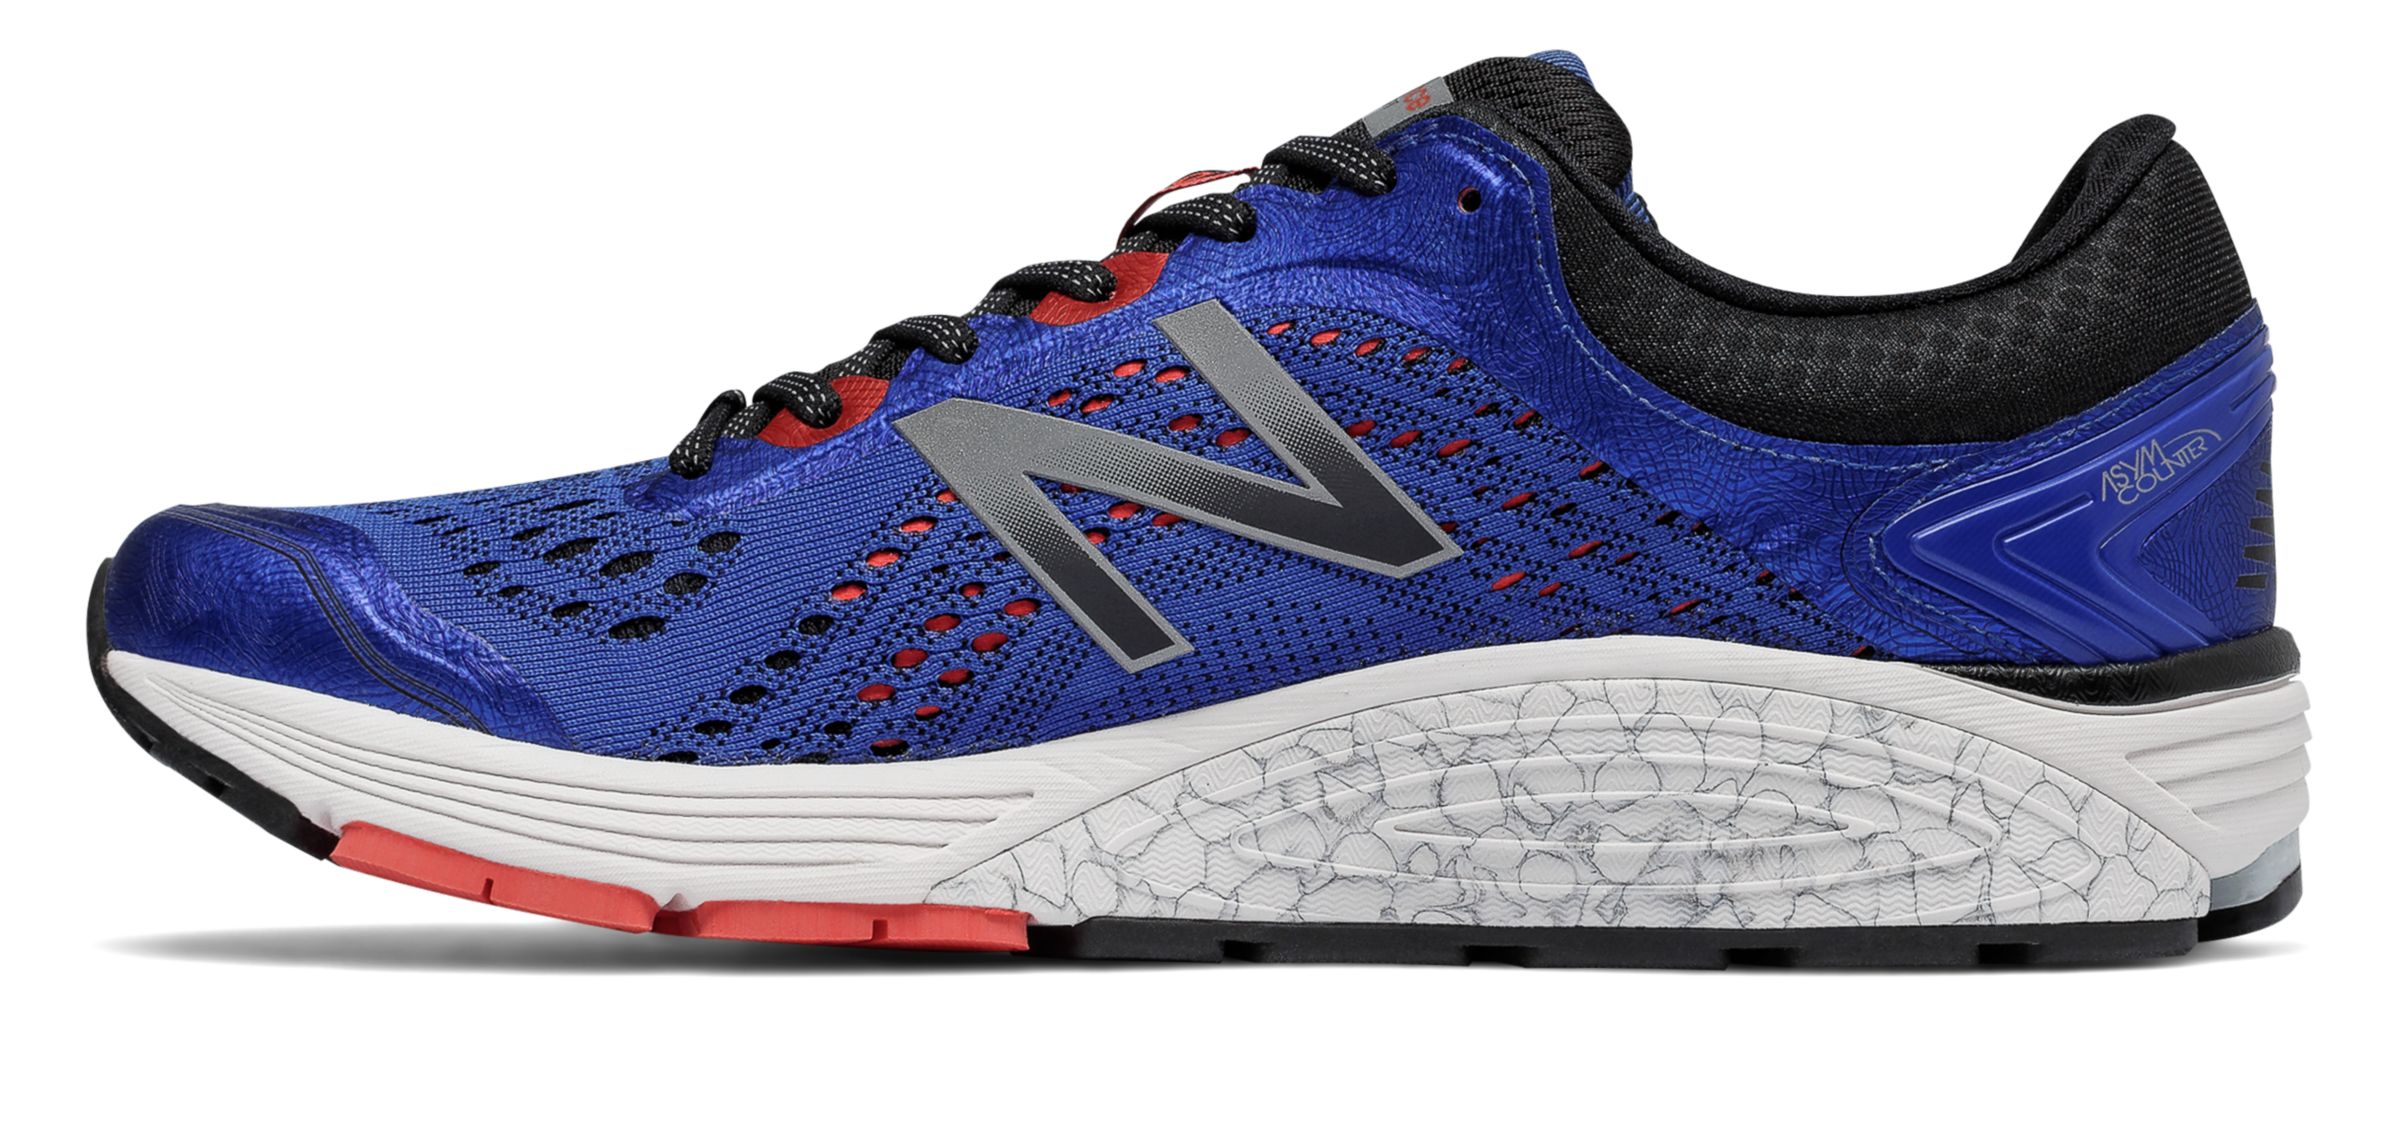 New Balance M1260-V7 on Sale - Discounts Up to 59% Off on M1260BO7 at Joe's New  Balance Outlet